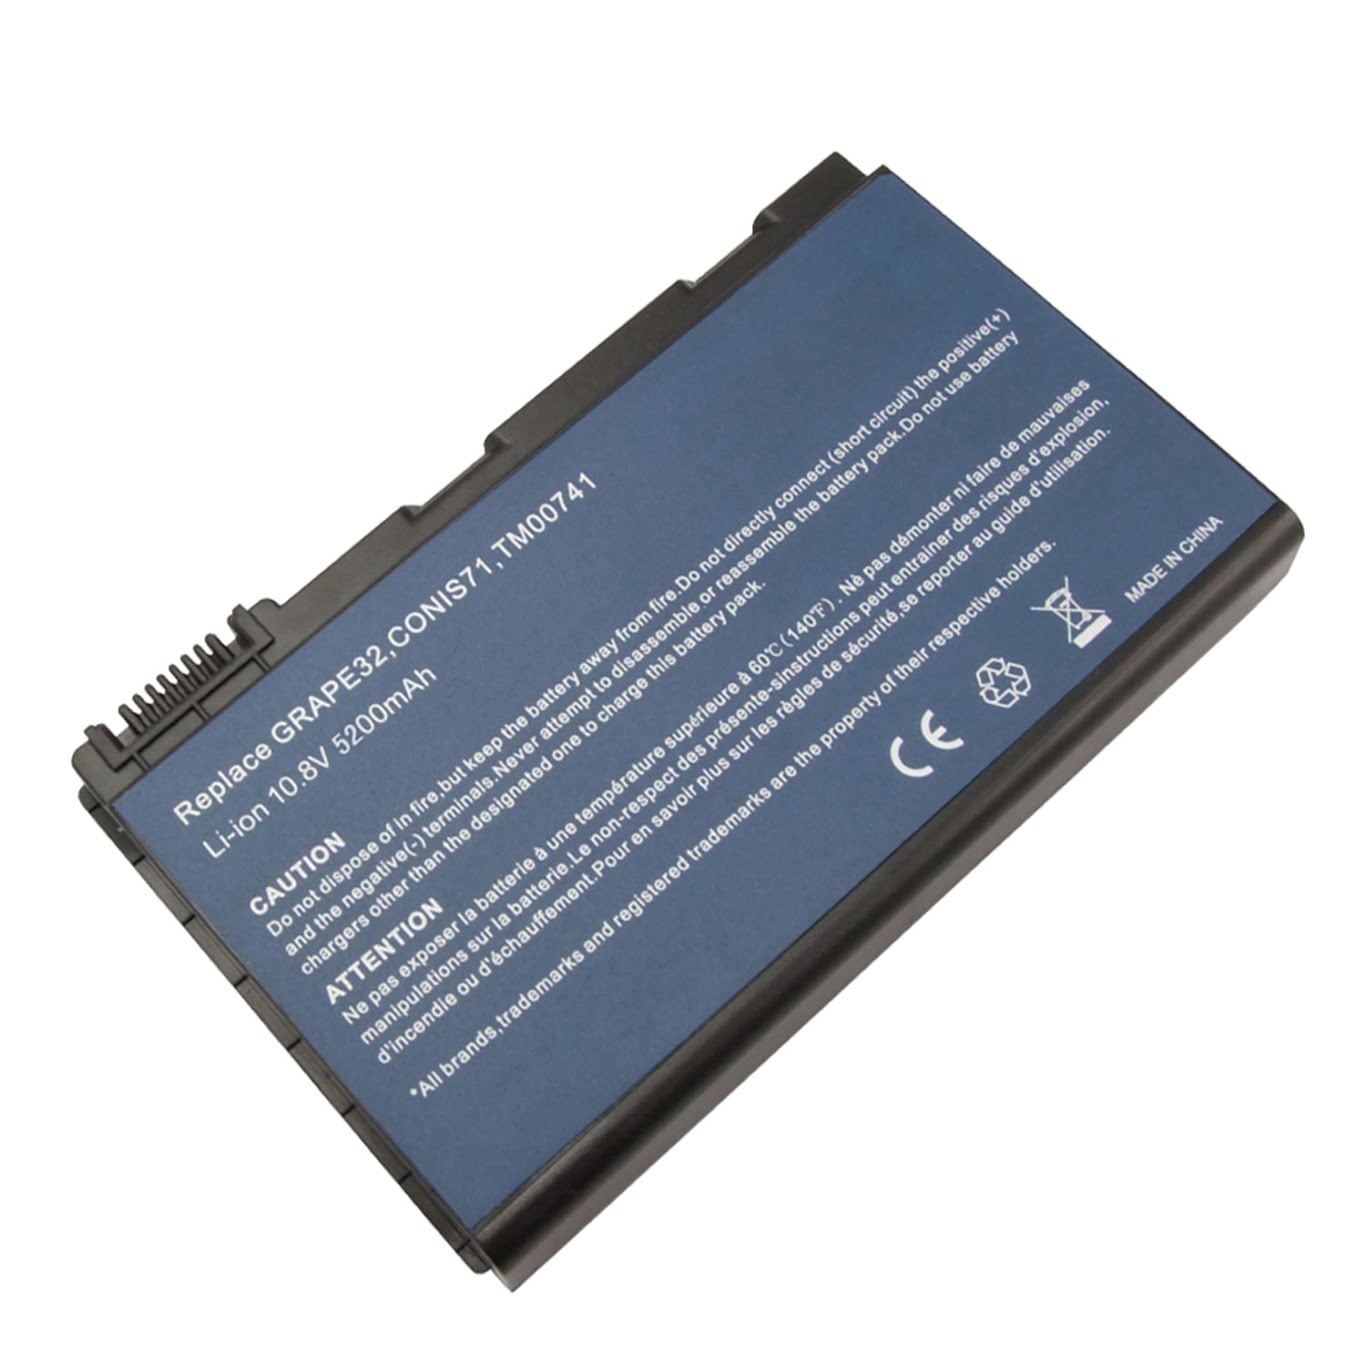 4UR18650F-2-WST-3, 934C2220F replacement Laptop Battery for Acer Extensa 5120, Extensa 5210, 6 cells, 10.8V, 4400mah/49wh